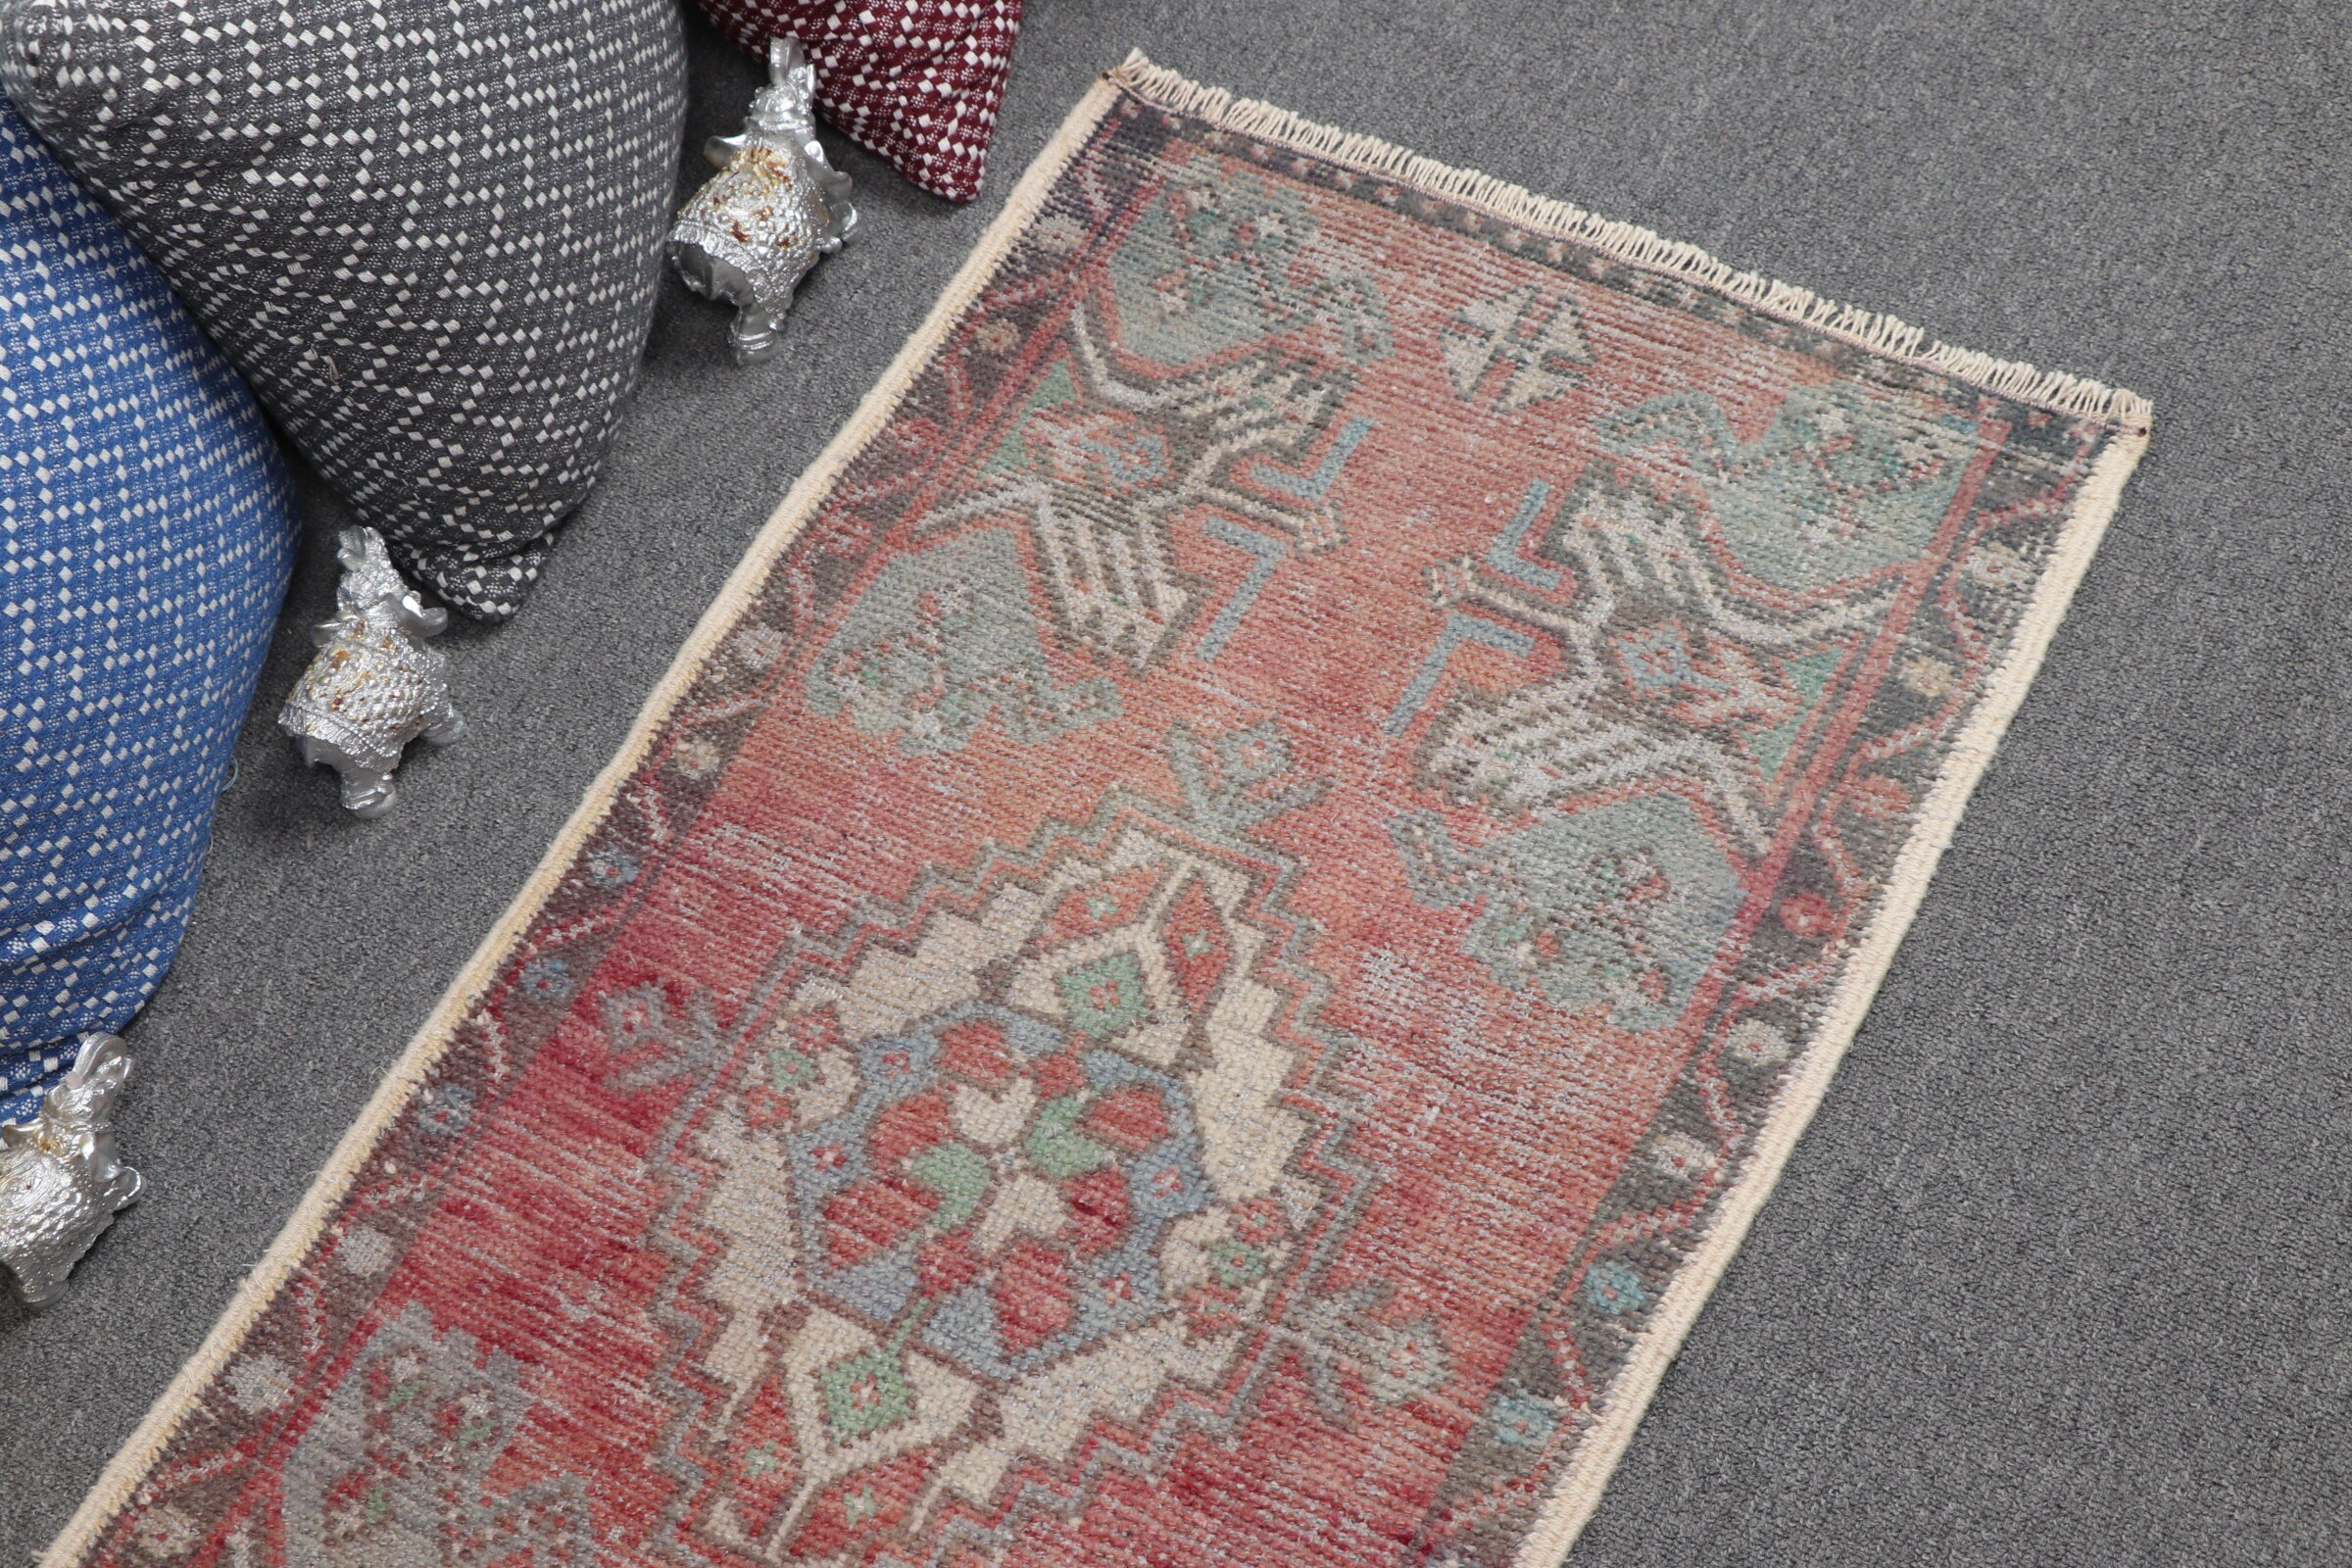 1.6x3.1 ft Small Rugs, Vintage Rugs, Car Mat Rugs, Bedroom Rug, Red Antique Rug, Rugs for Kitchen, Oushak Rug, Turkish Rug, Old Rugs